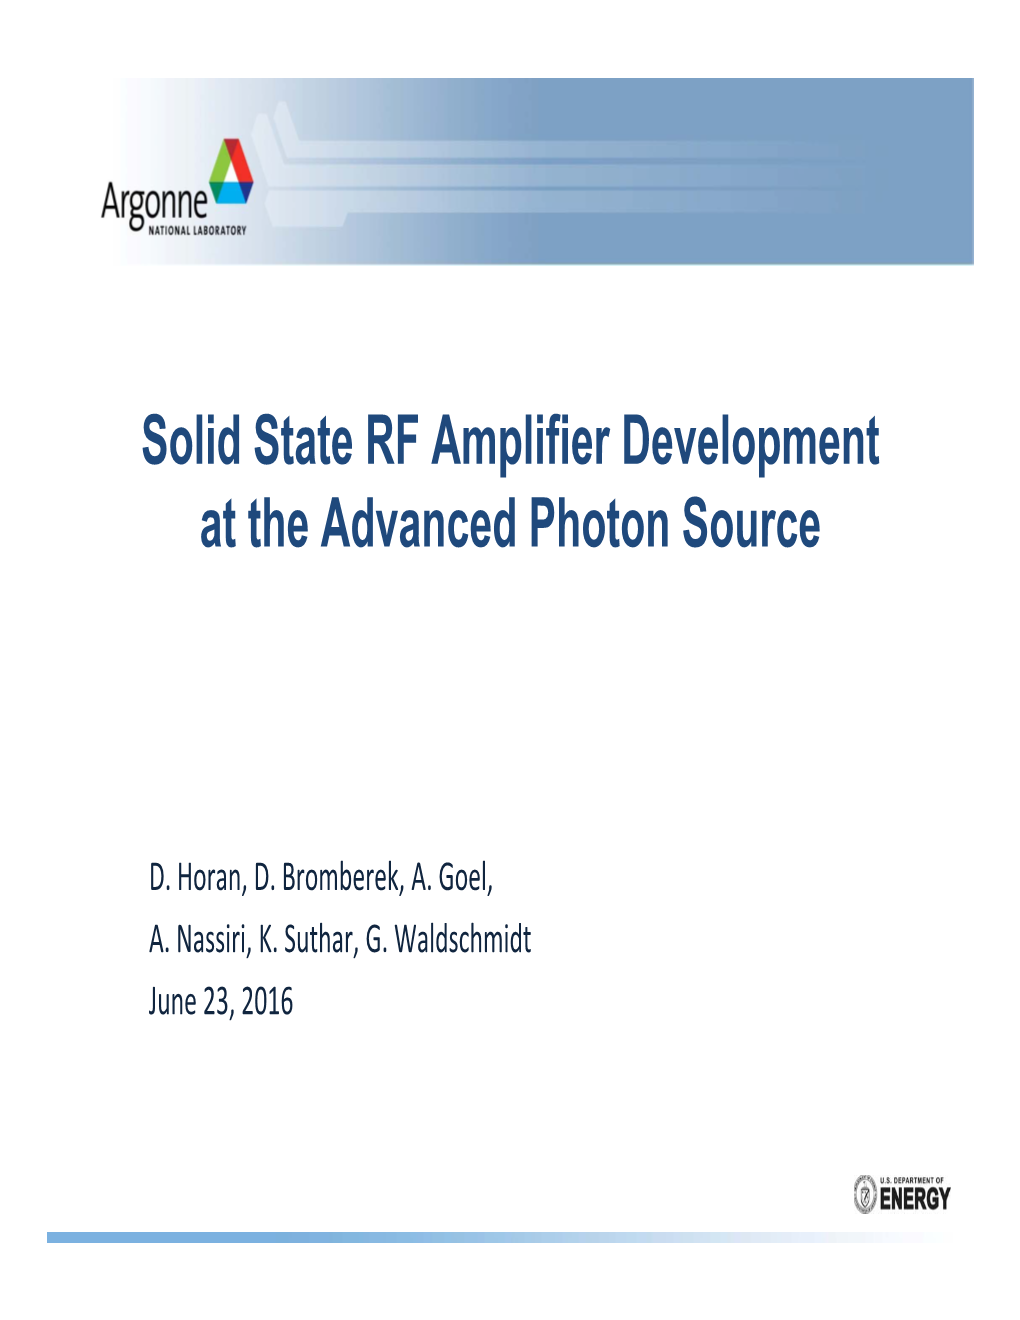 CWRF2016 Solid State RF Amplifier Development at the Advanded